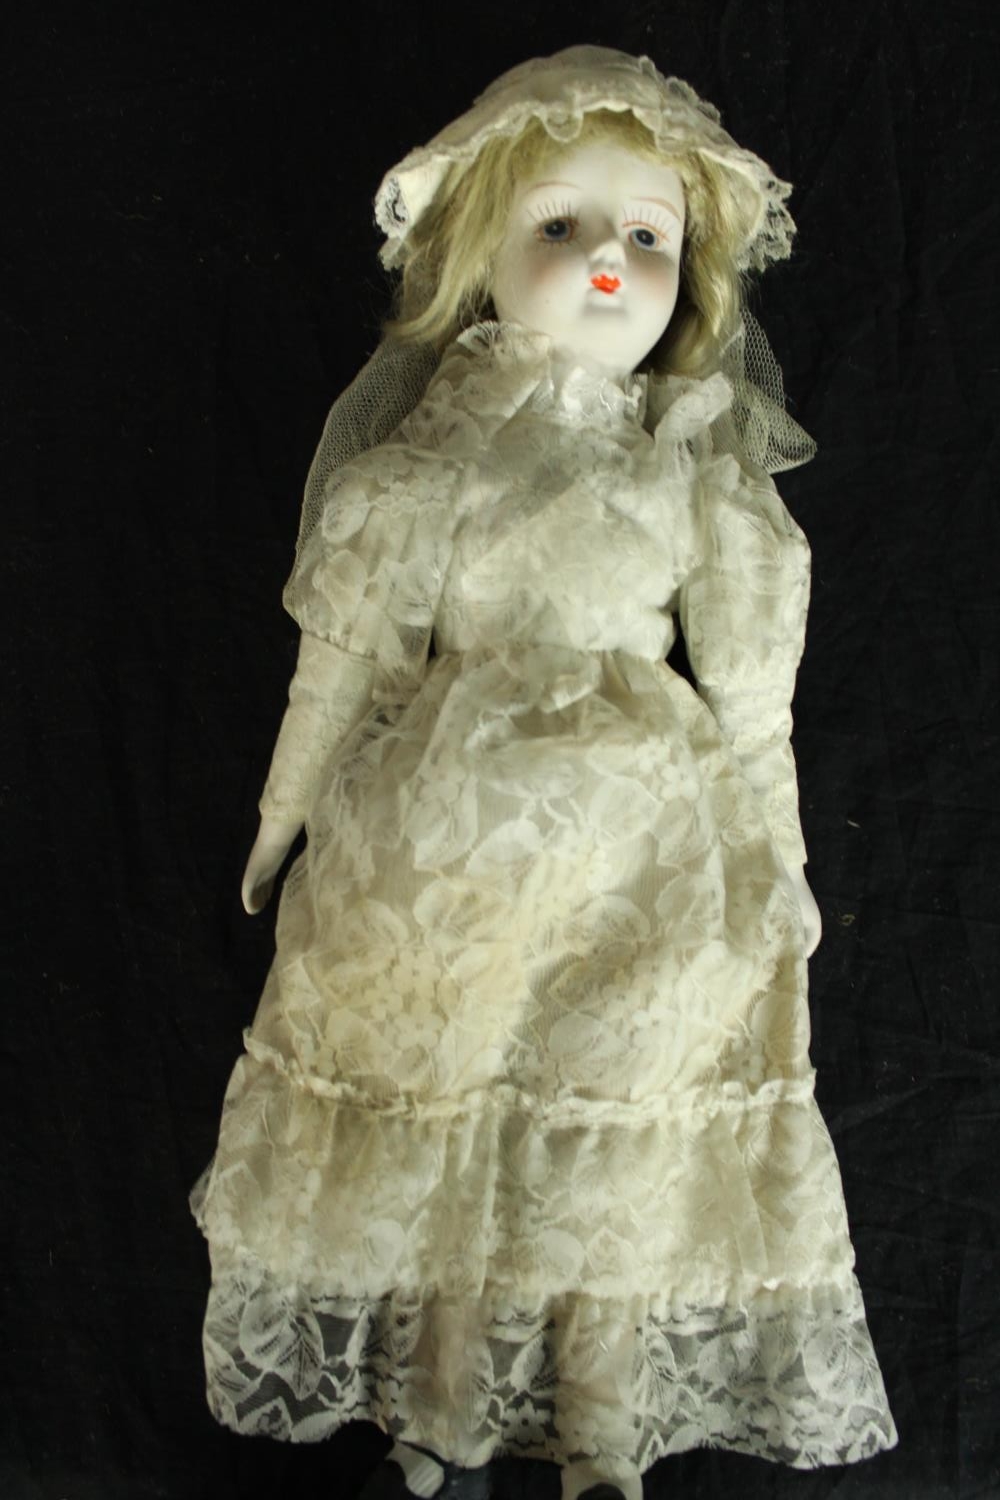 A ceramic bride doll with a hand painted face and lace clothing. Early twentieth century. H.47cm.